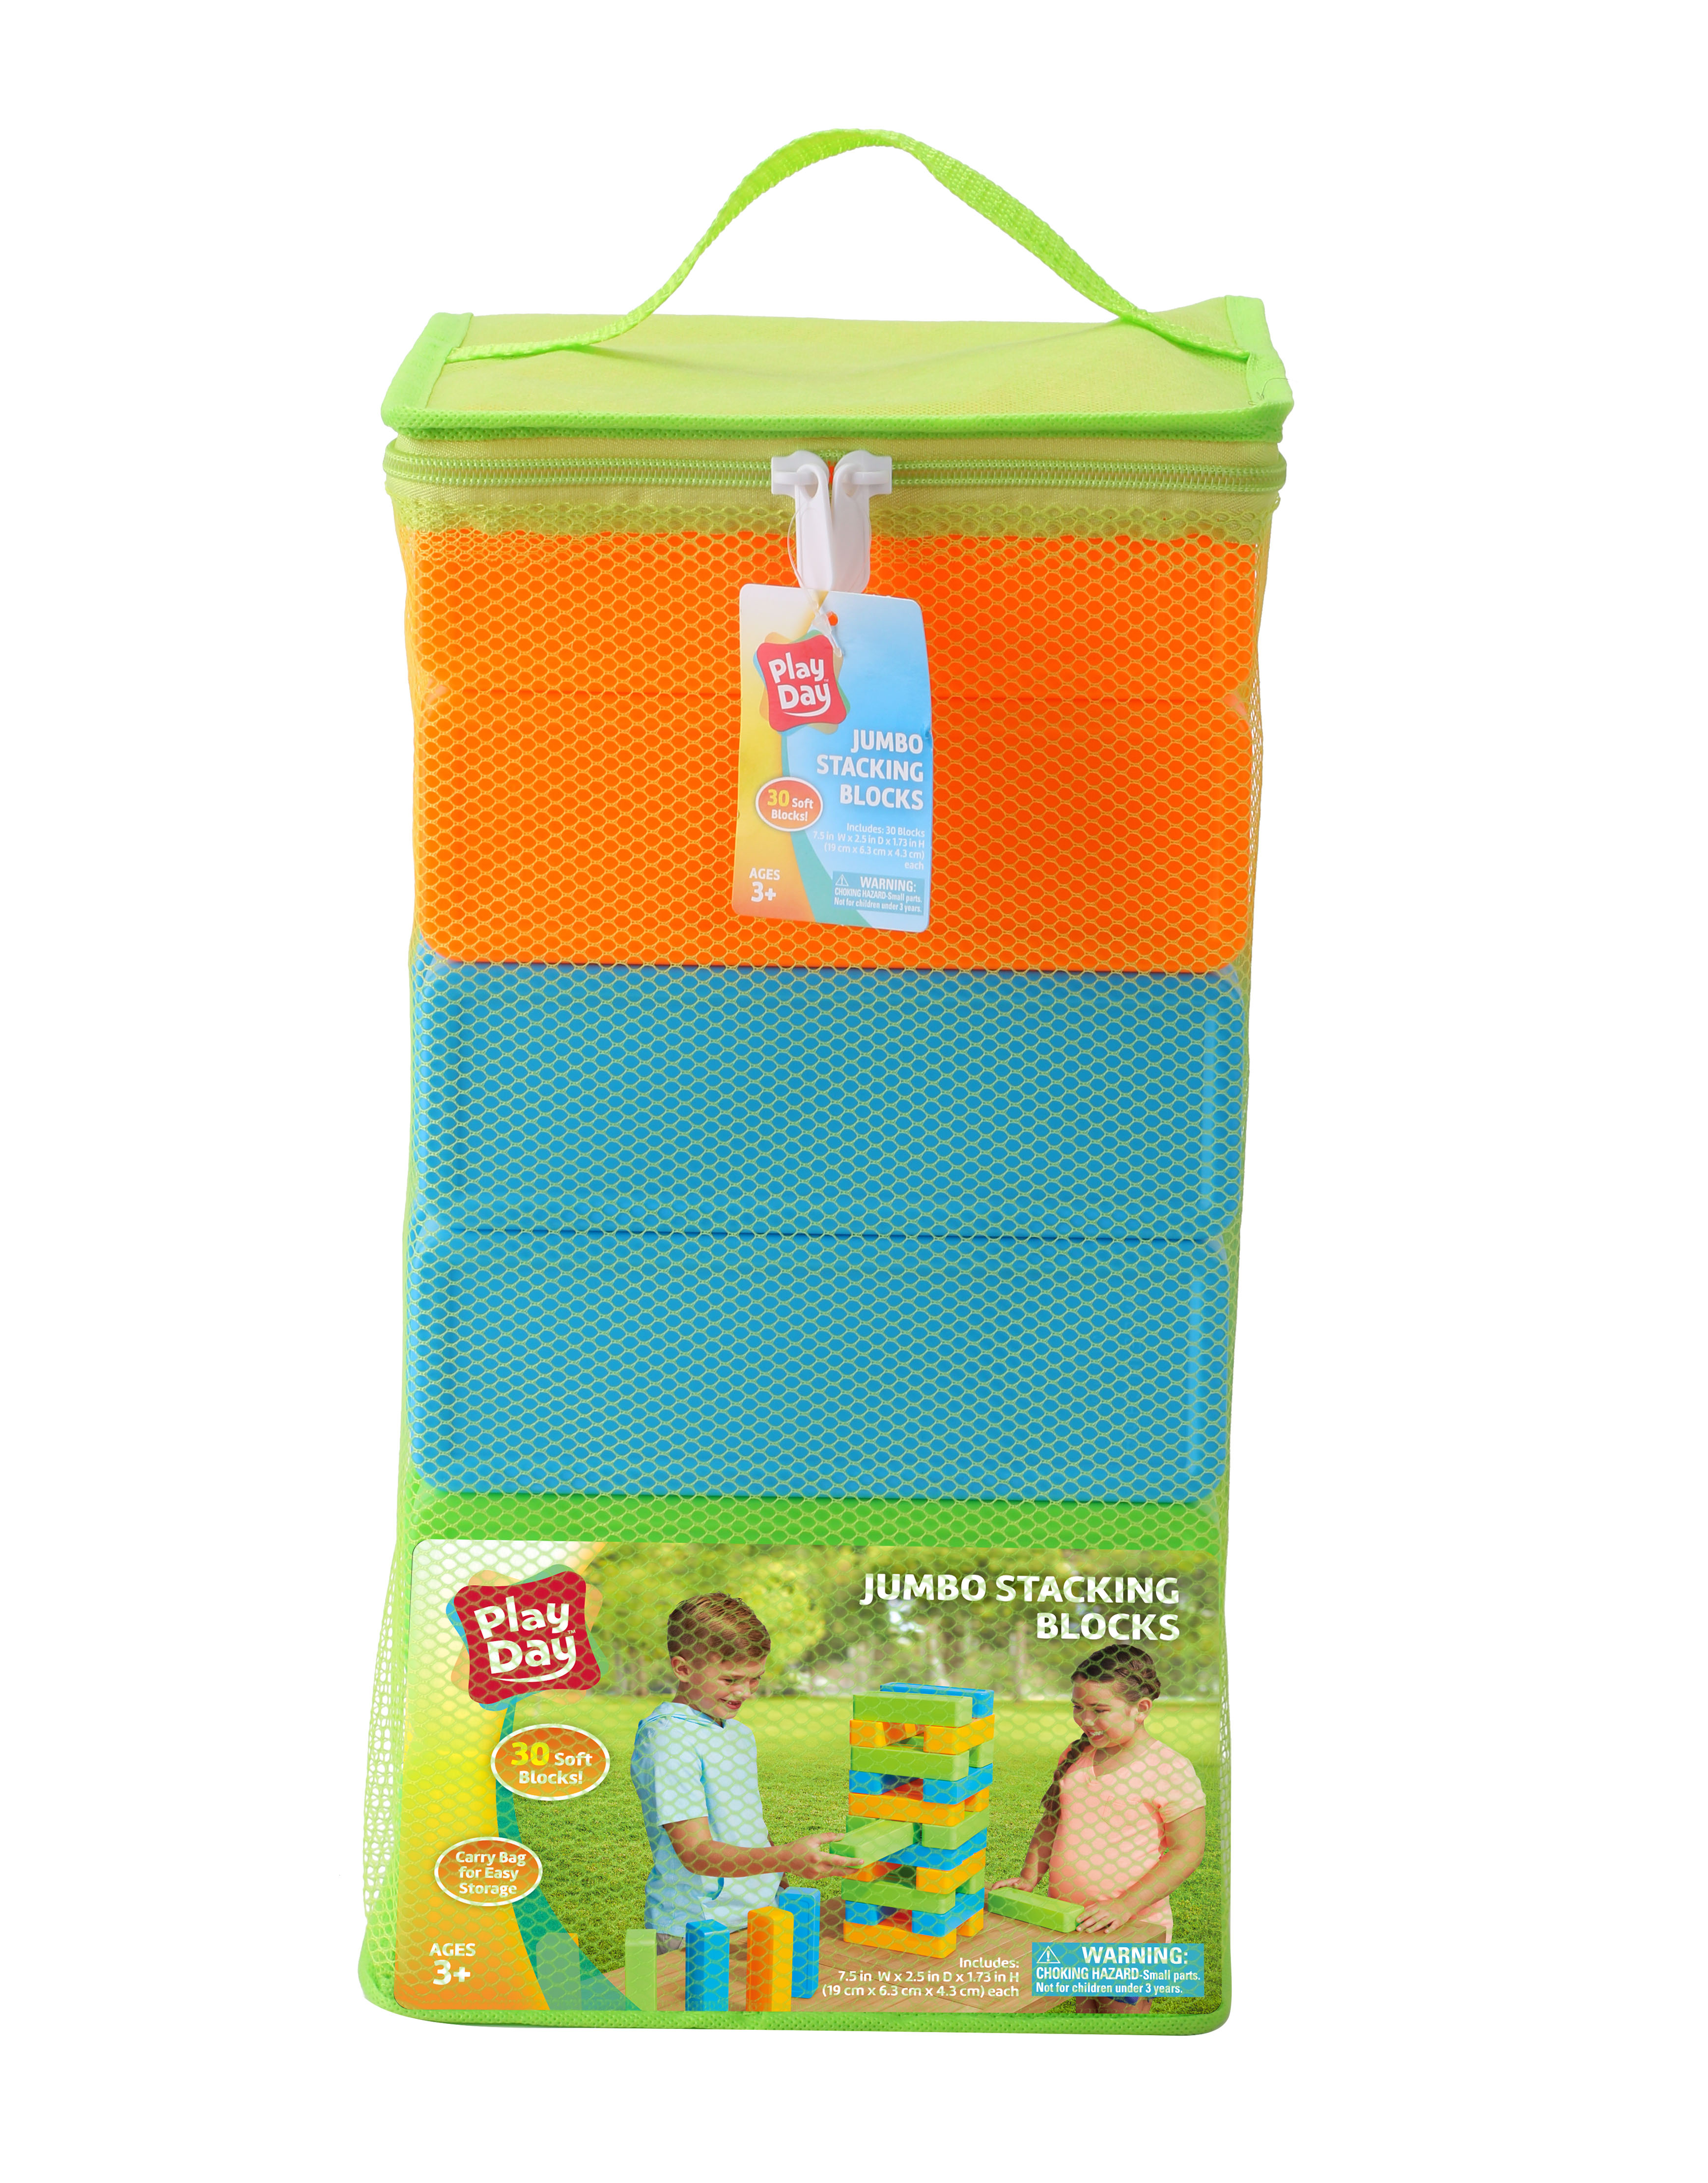 Play Day Jumbo Toy Stacking Block Set, 30 Outdoor Lawn Blocks, Children Ages 3+ - image 2 of 5